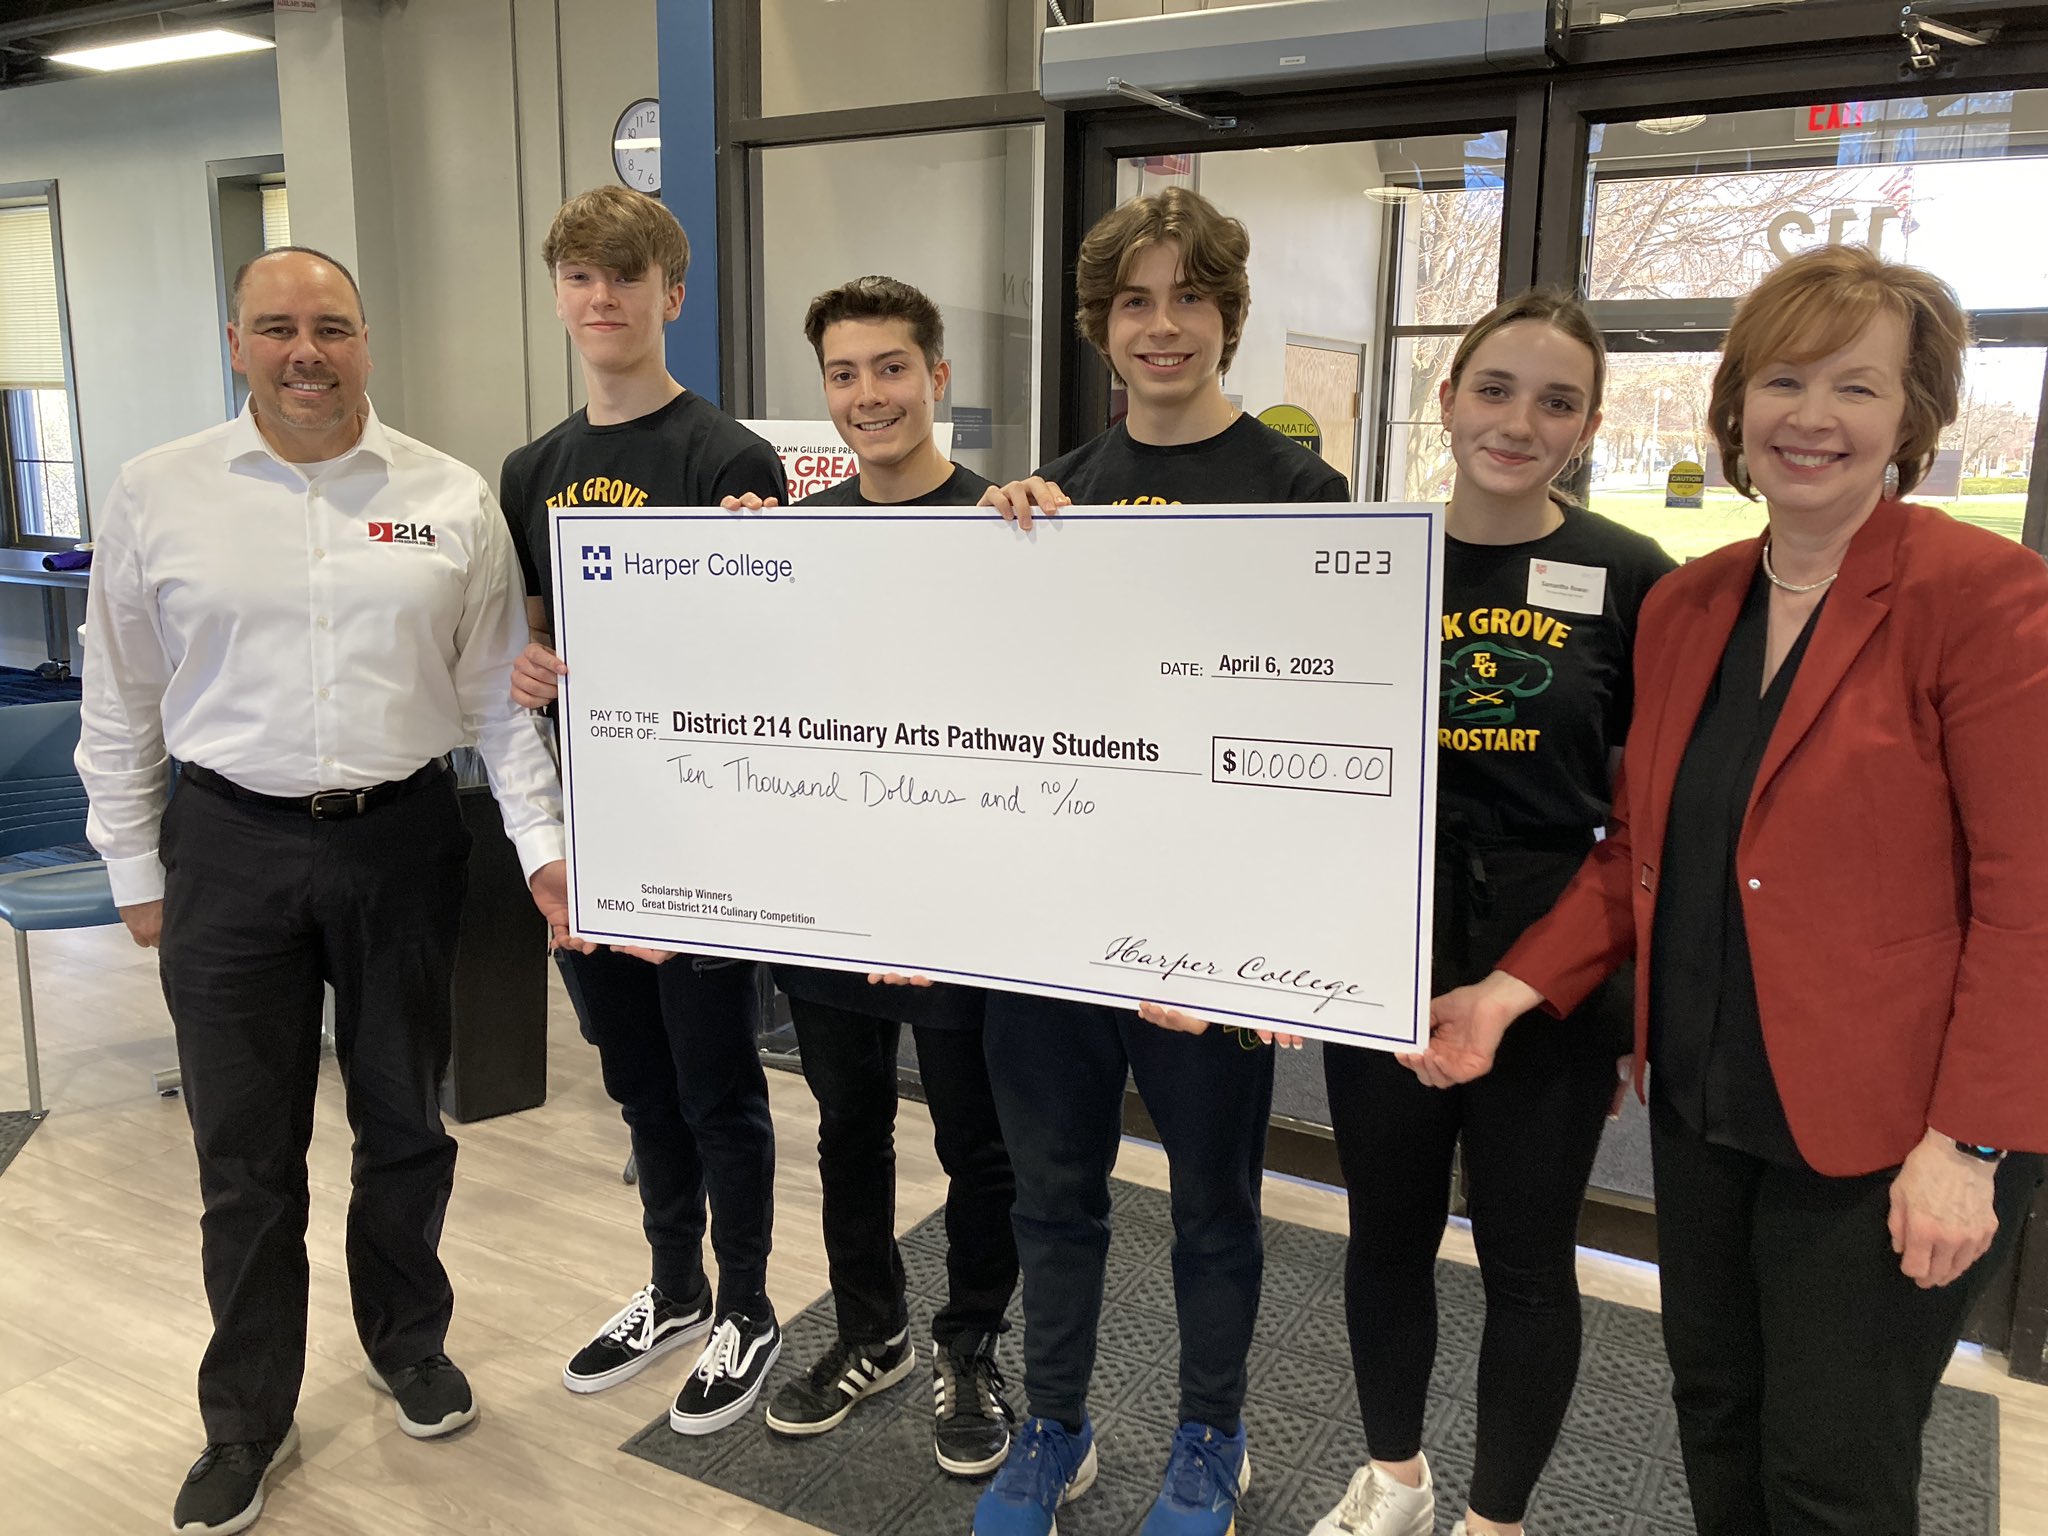 The four winning students hold a large check for $10,000 from Harper College. Next to the students are a representative from District 214 and Senator Gillespie.